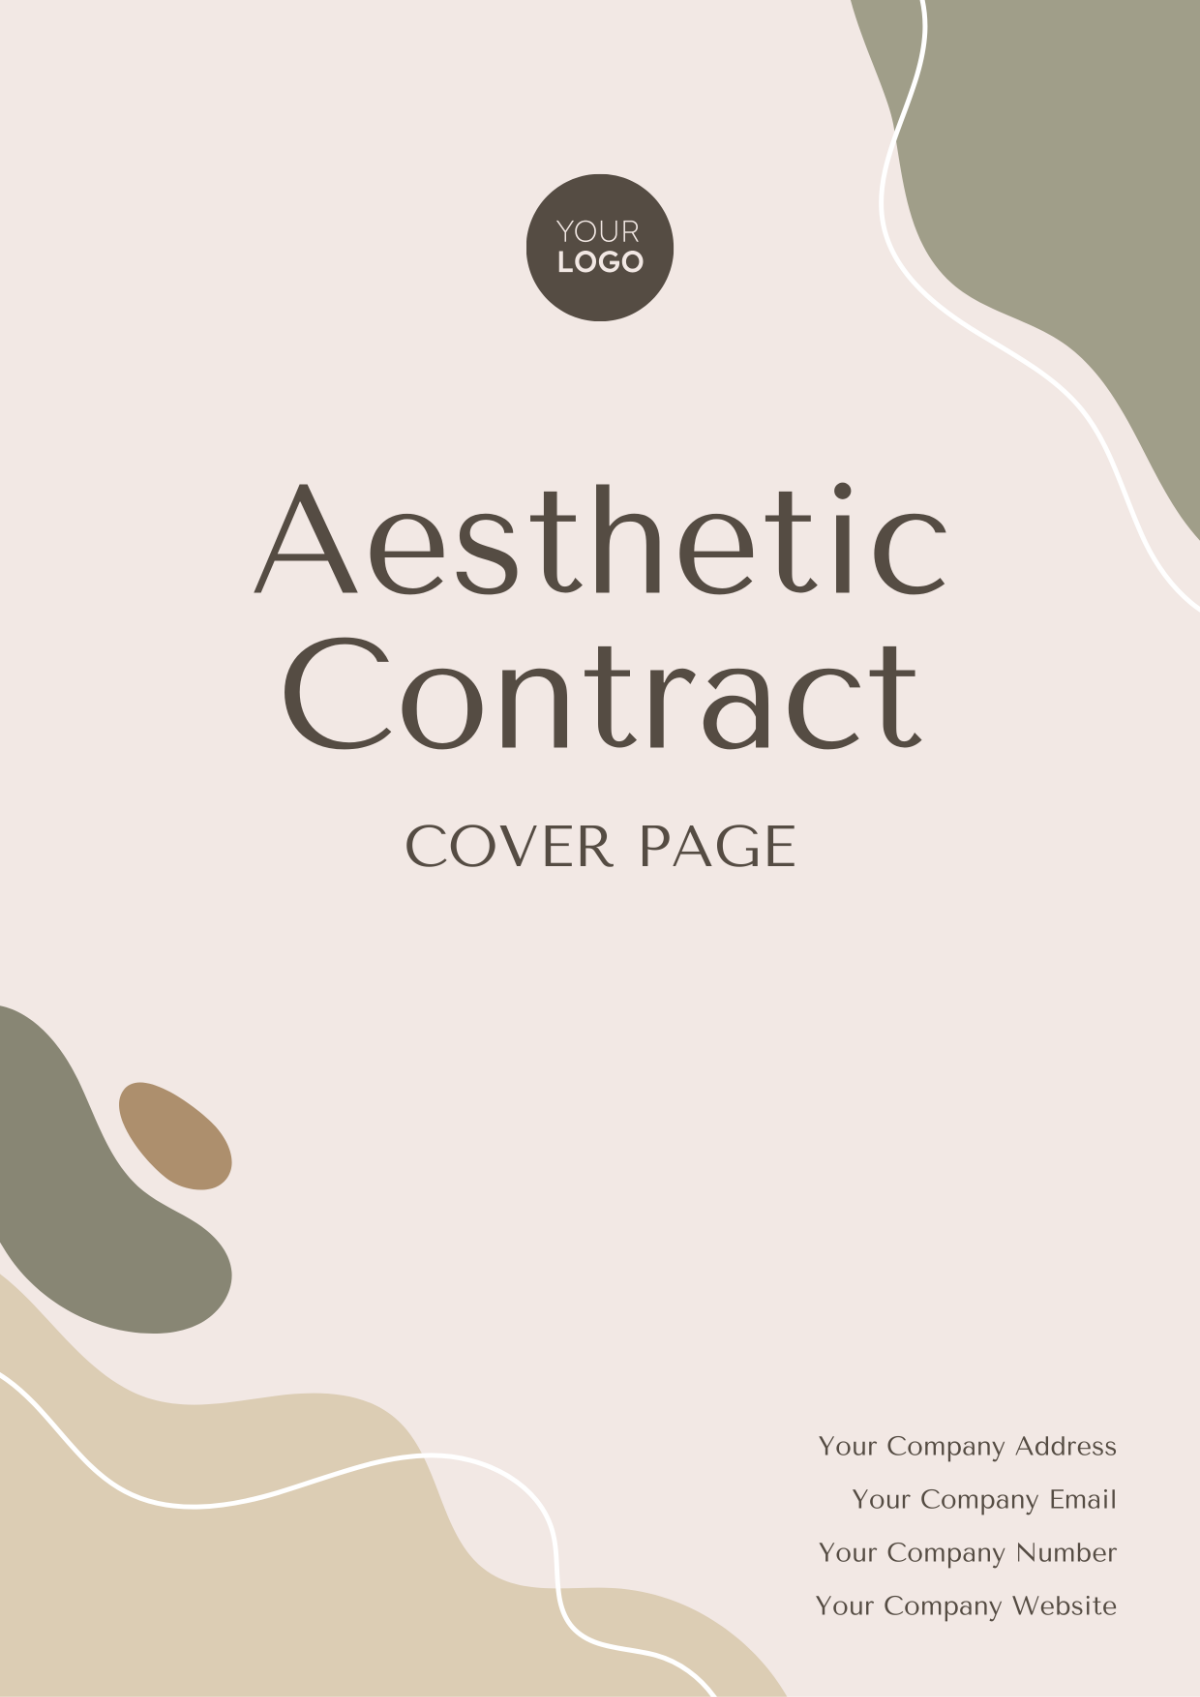 Aesthetic Contract Cover Page